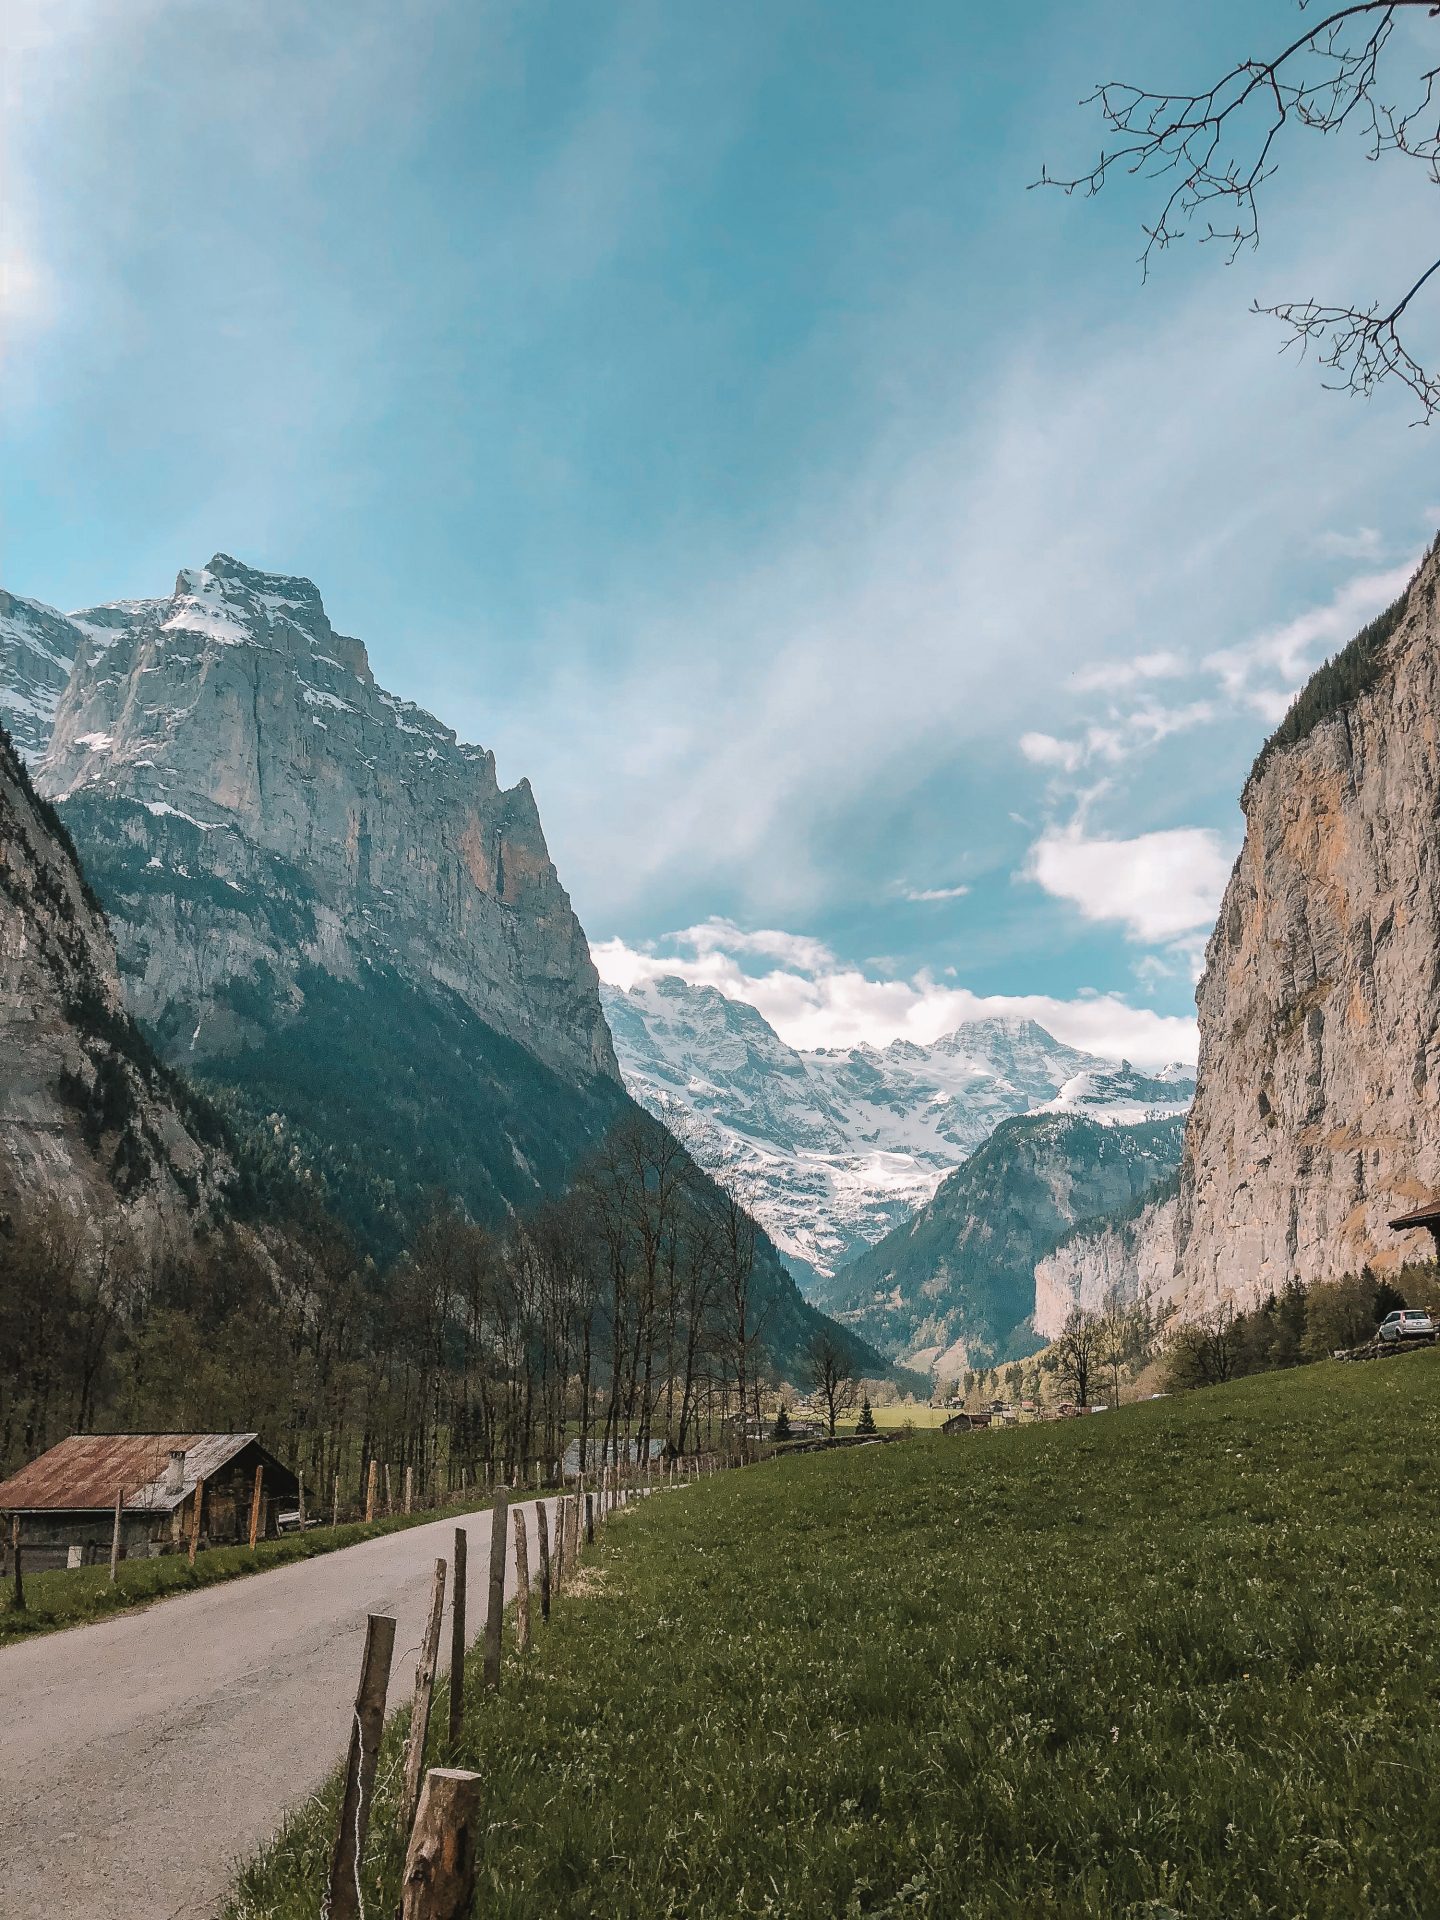 A roadway to the Swiss Alps in the valley of Lauterbrunnen, Switzerland.